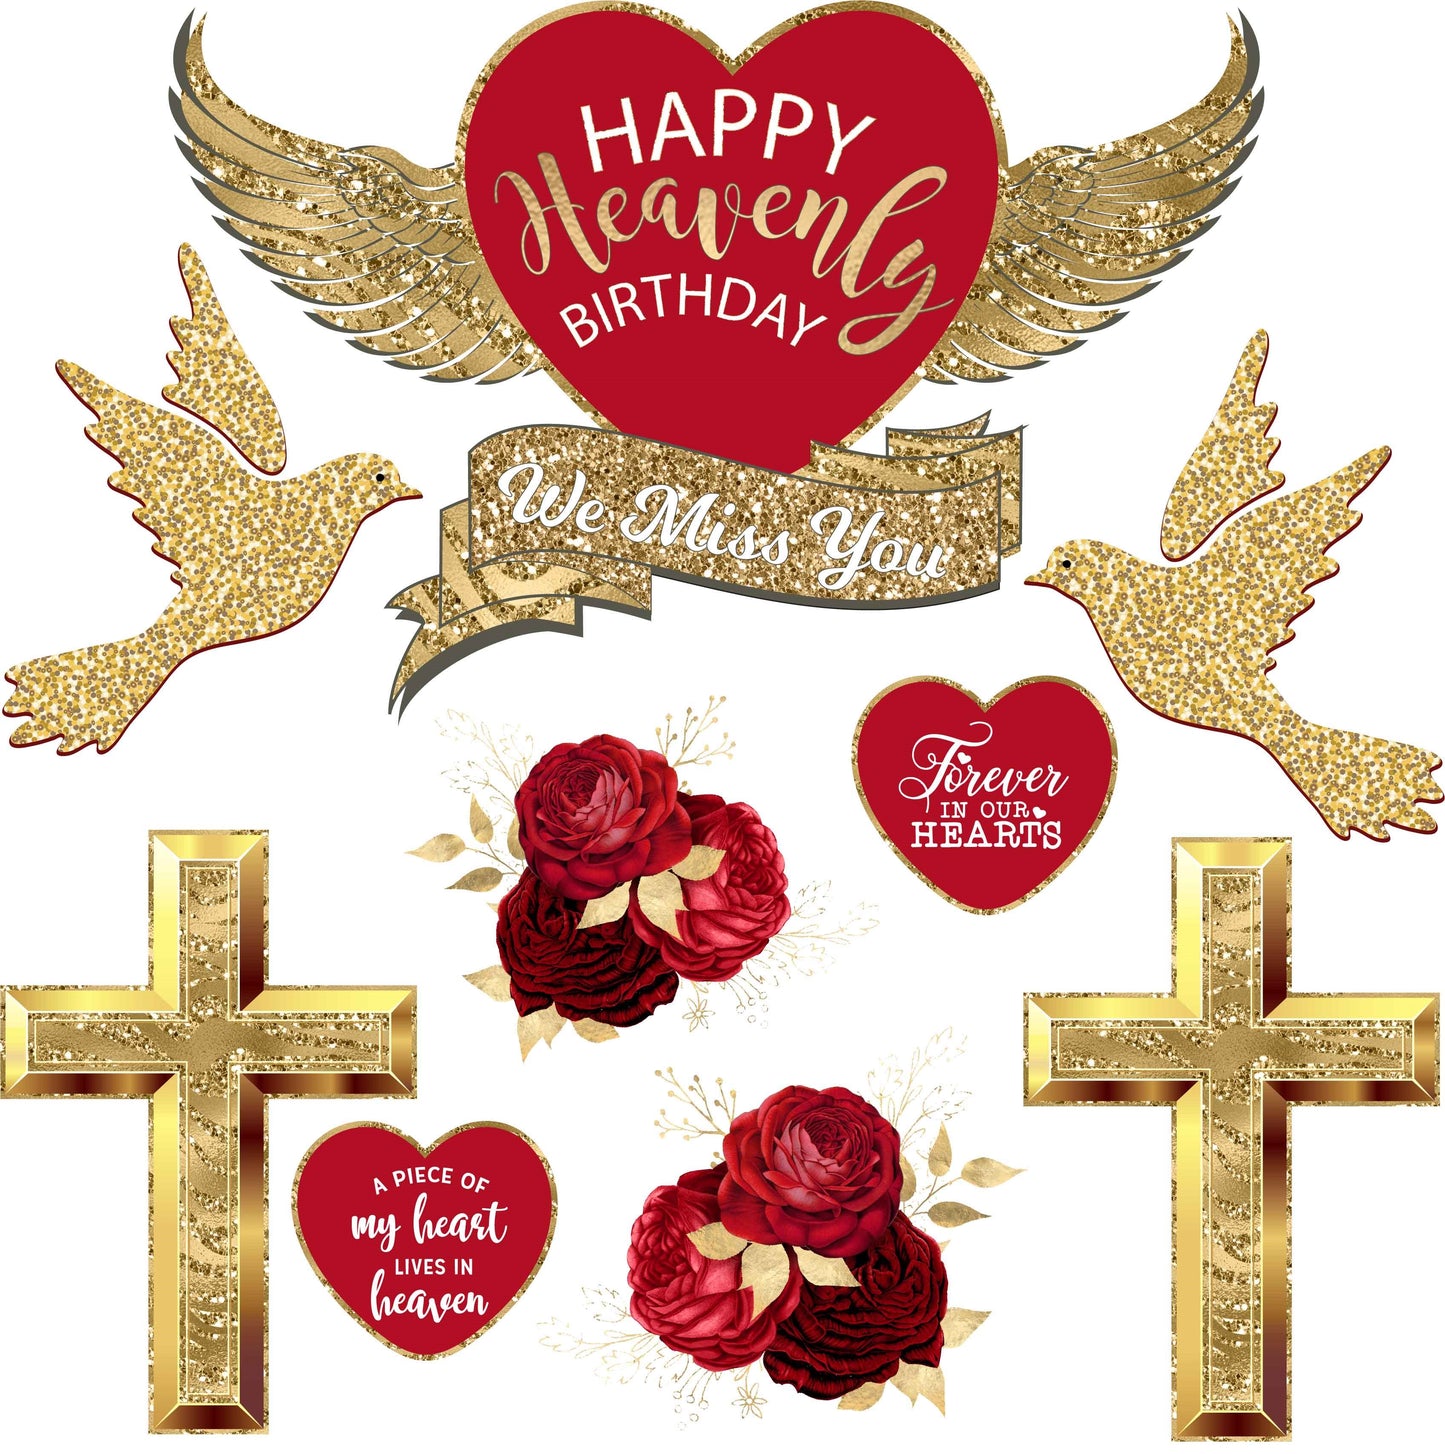 Happy Heavenly Birthday Theme Half Sheet Misc. (Must Purchase 2 Half sheets - You Can Mix & Match)